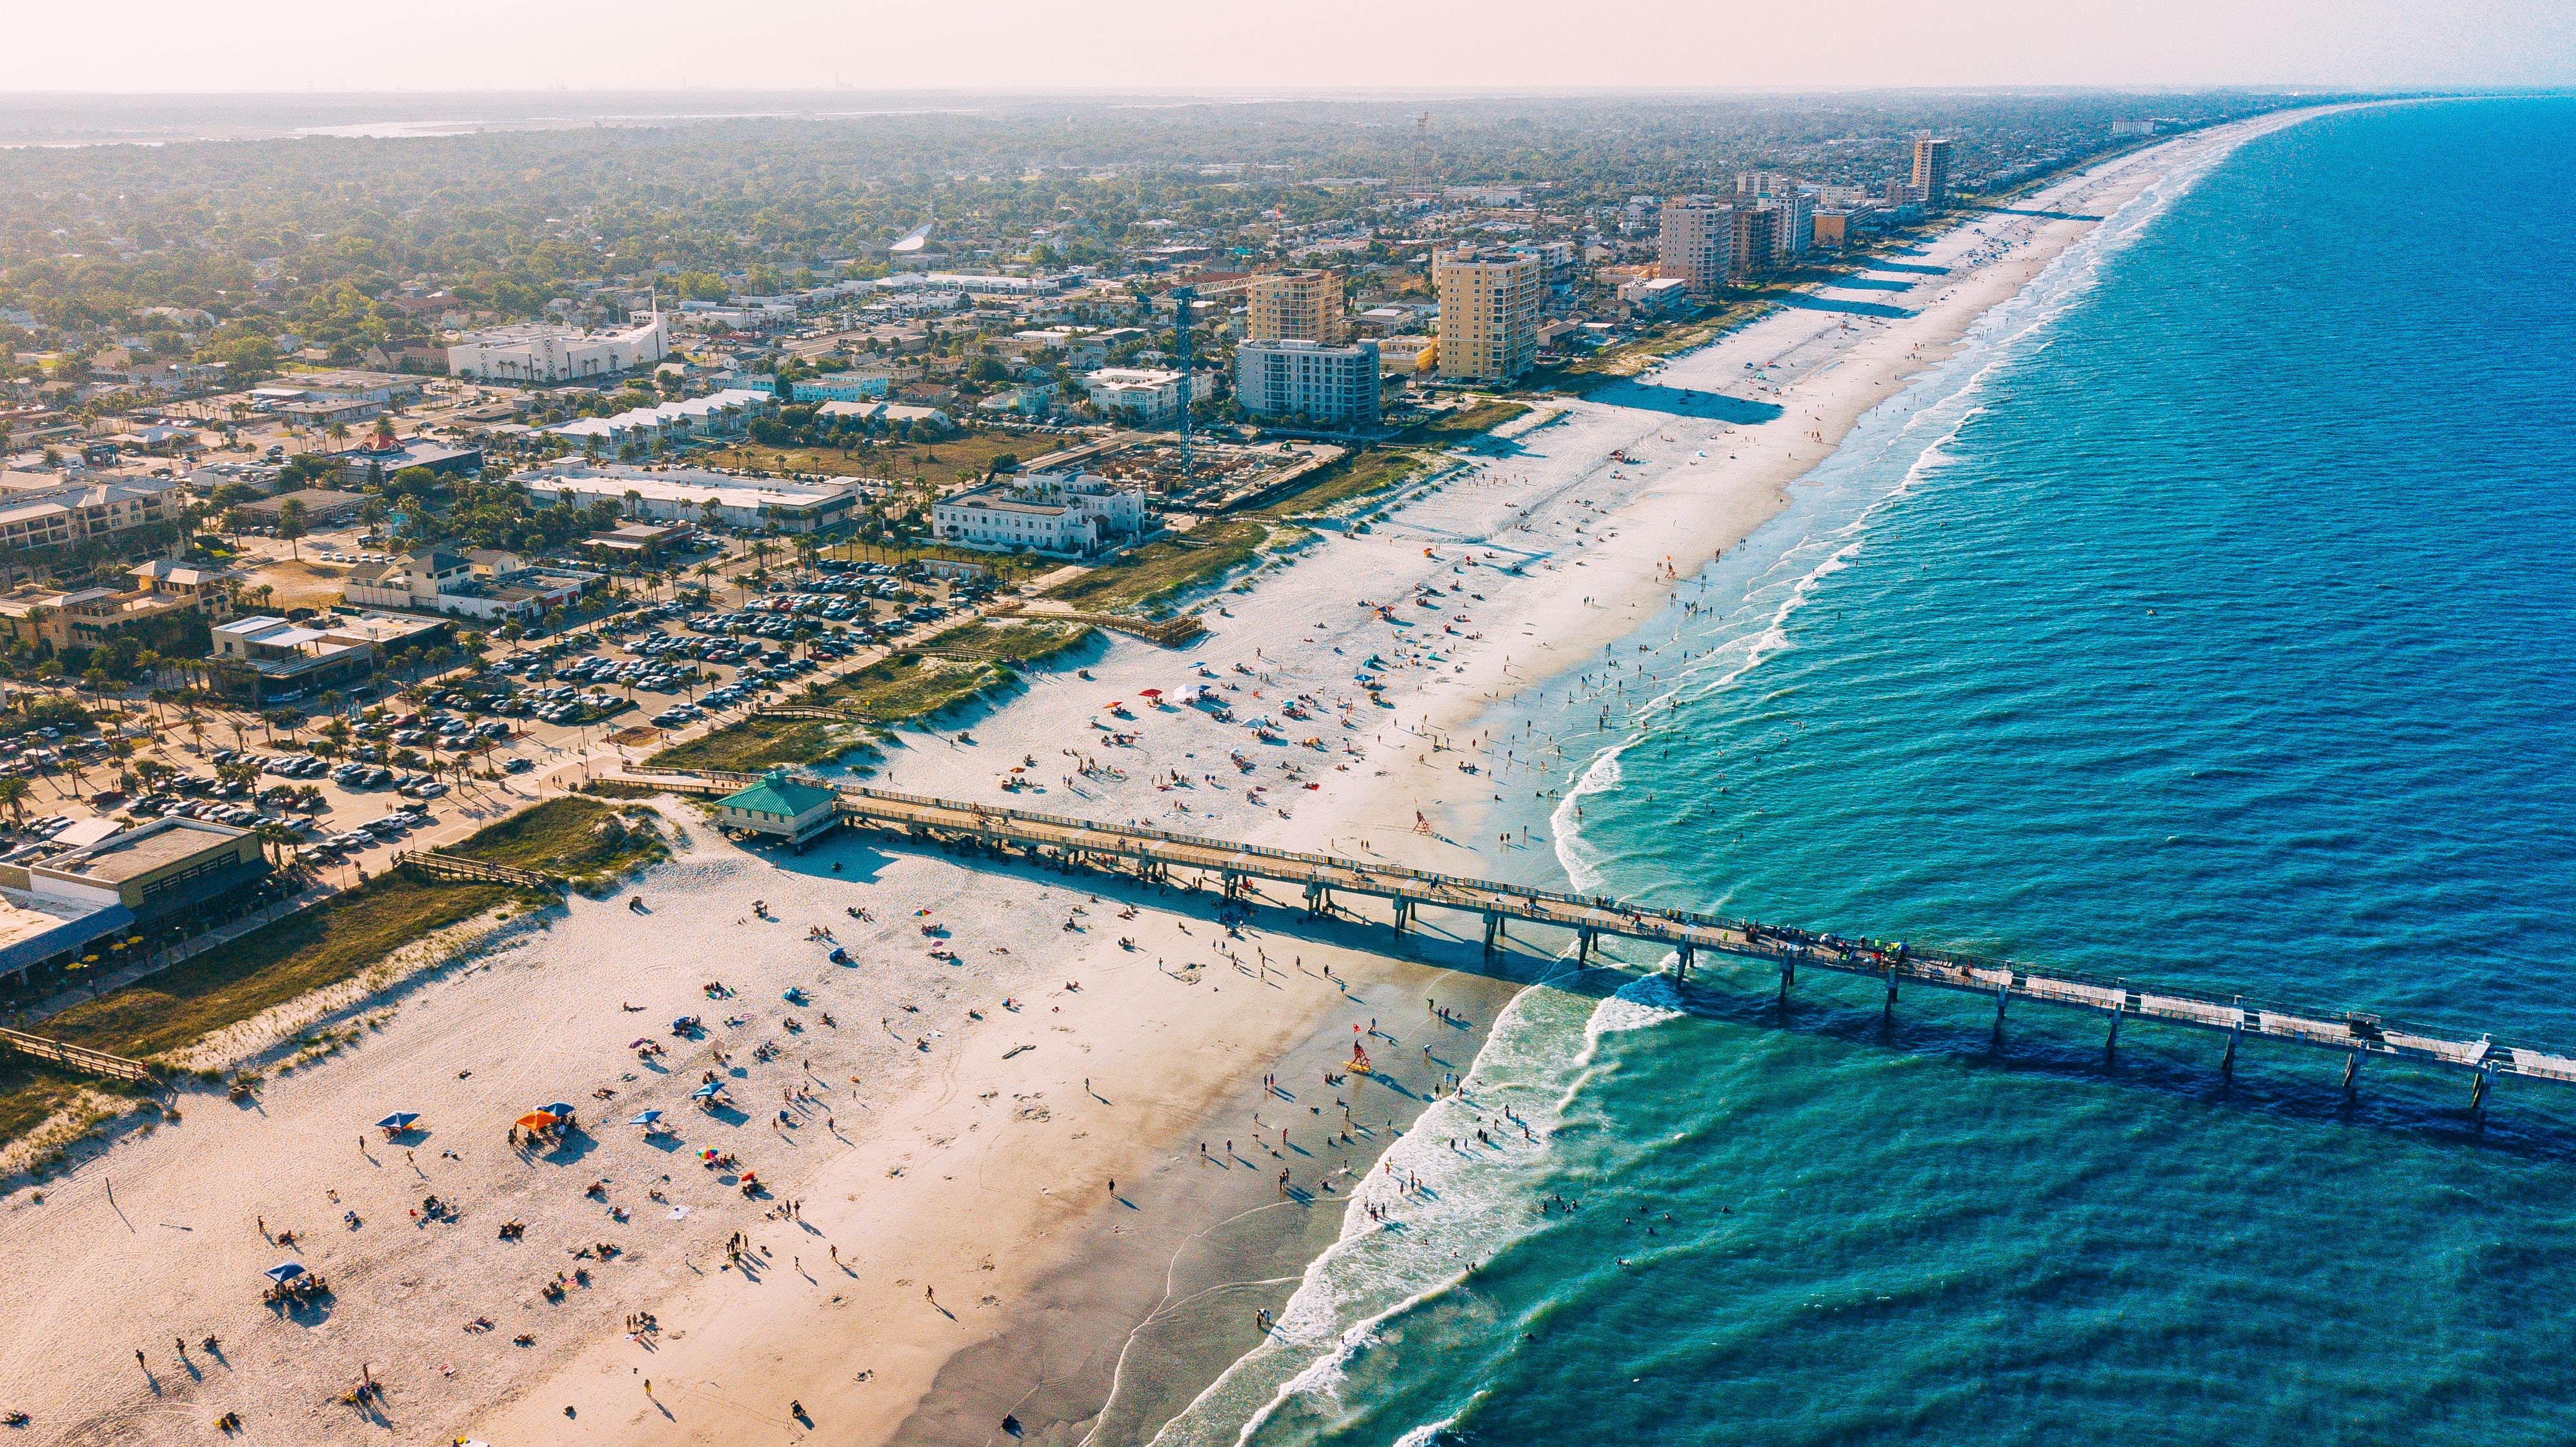 The Top 3 Beaches in Jacksonville